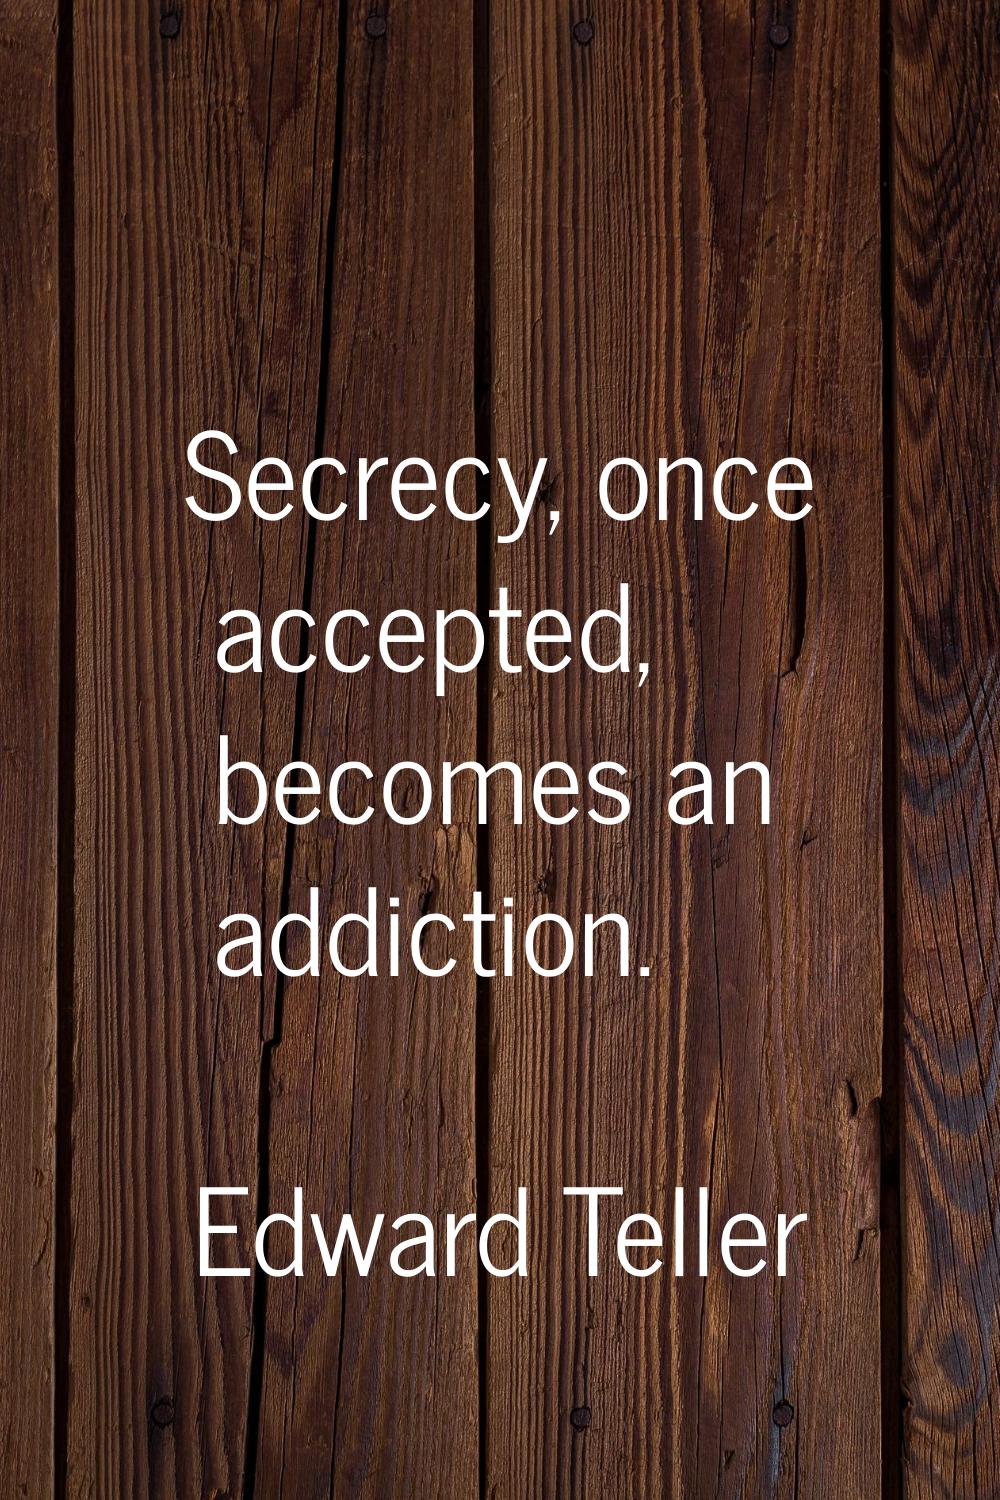 Secrecy, once accepted, becomes an addiction.